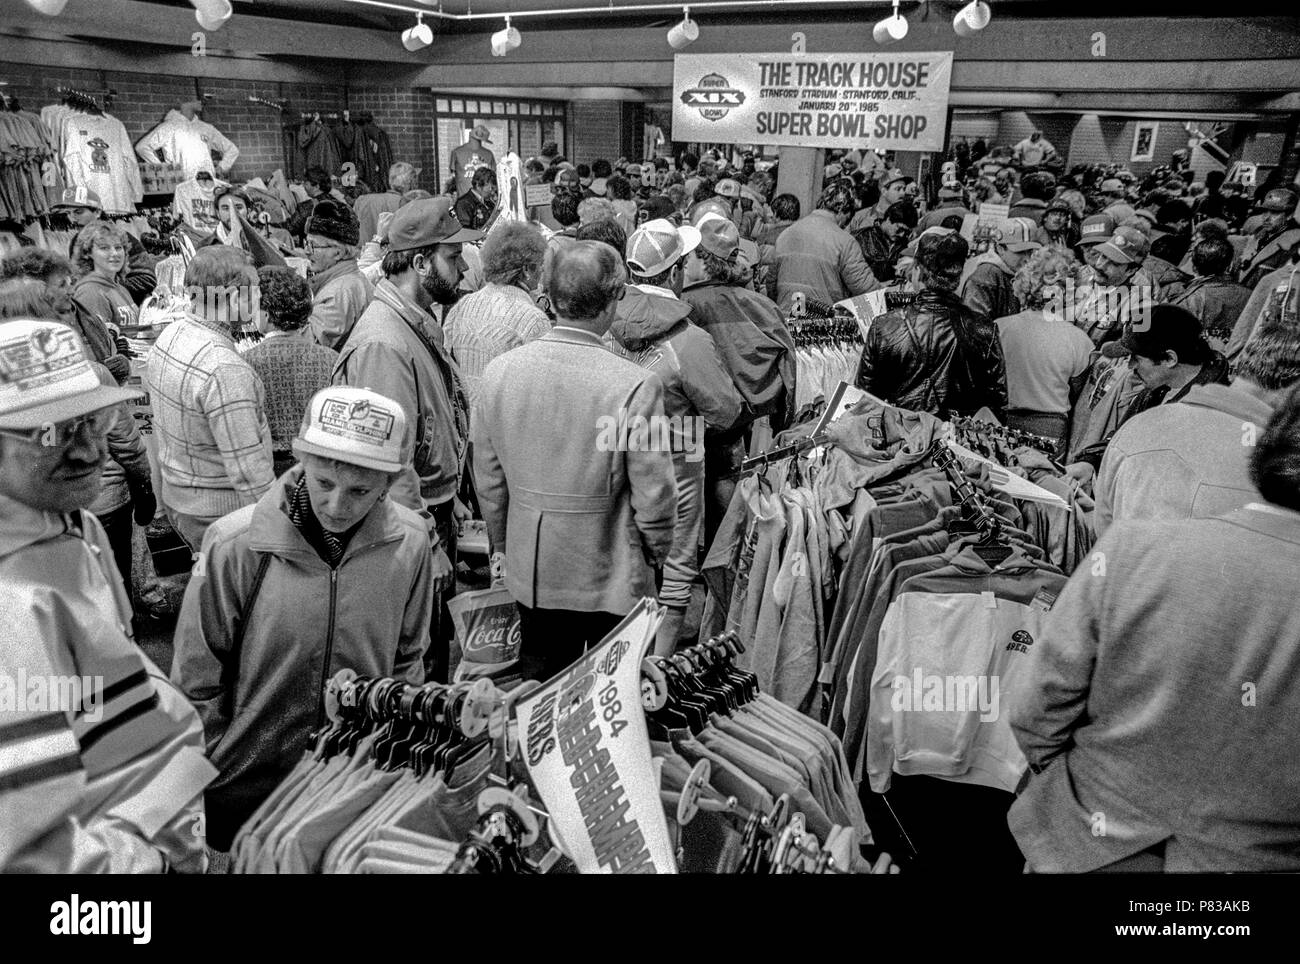 Stanford, California, USA. 20th Jan, 1985. Fans pick up NFL gear at souvenir store near the Super Bowl XIX tailgate on the Stanford University campus. The San Francisco 49ers defeated the Miami Dolphins 38-16 on Sunday, January 20, 1985. Credit: Al Golub/ZUMA Wire/Alamy Live News Stock Photo